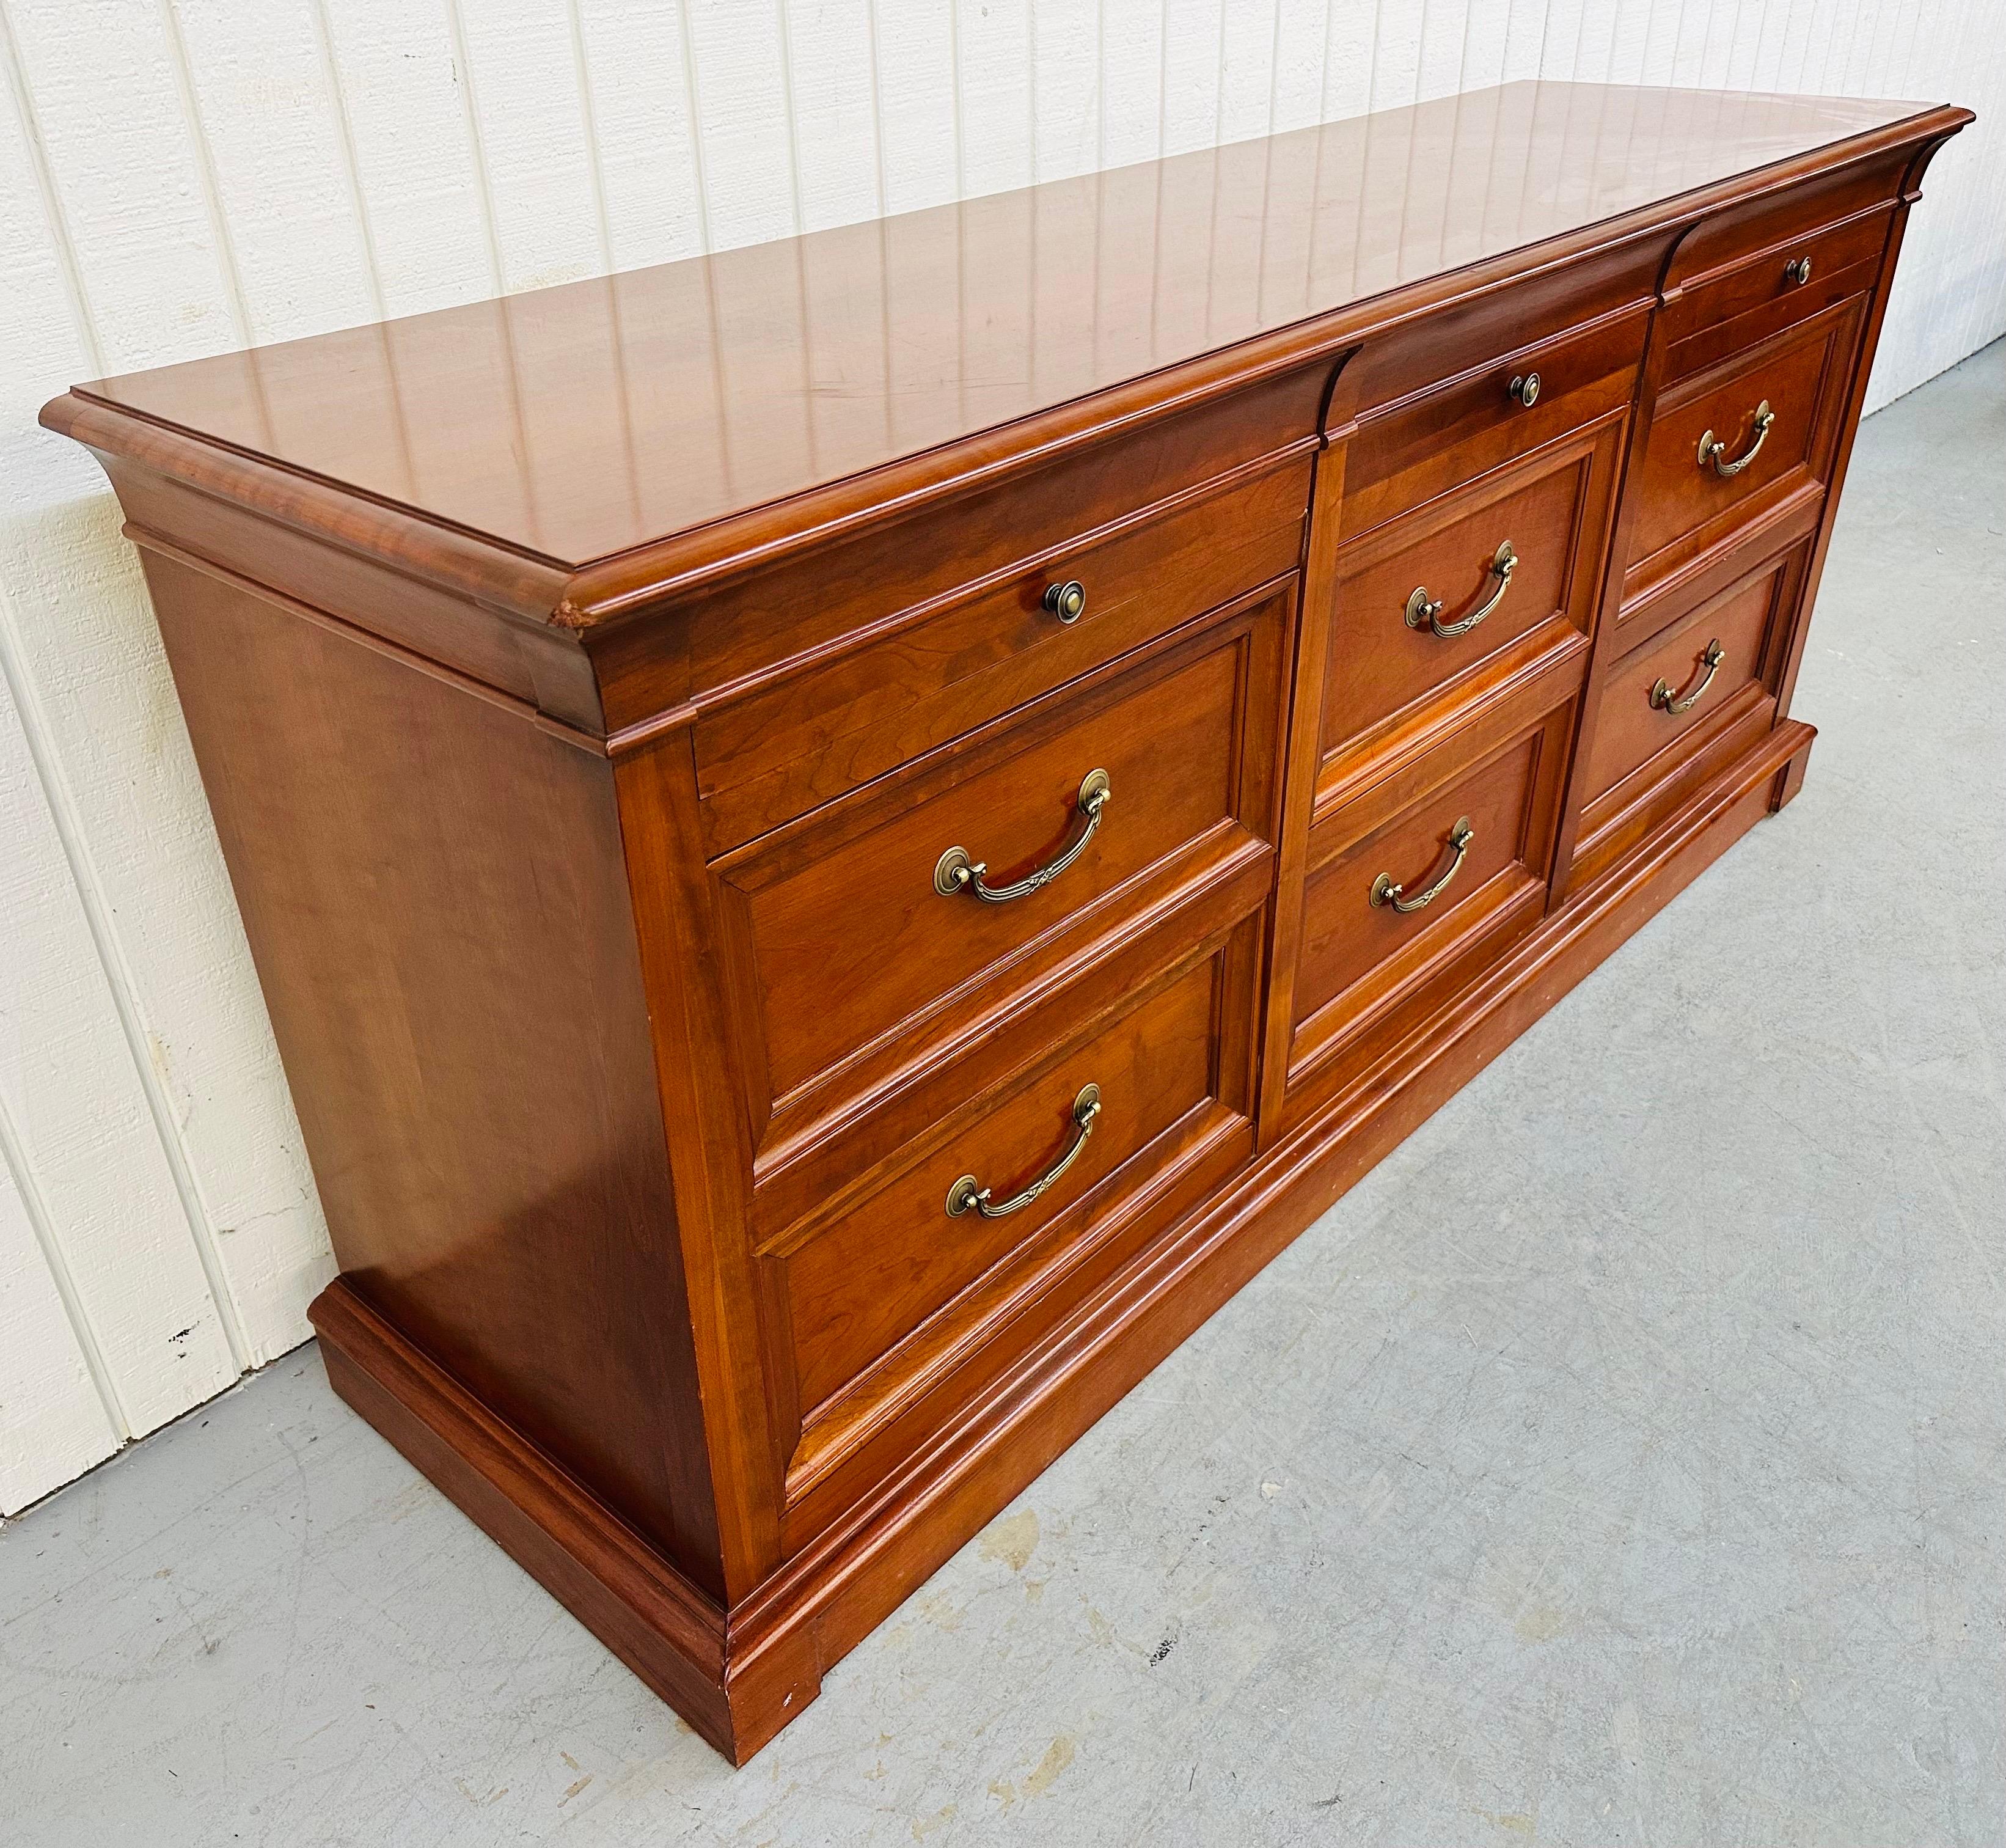 This listing is for a vintage Ethan Allen Regency style Medallion Collection Cherry 9-Drawer Dresser. Featuring nine drawers for storage, original hardware, straight line Regency style design, and a beautiful cherry finish. This is an exceptional